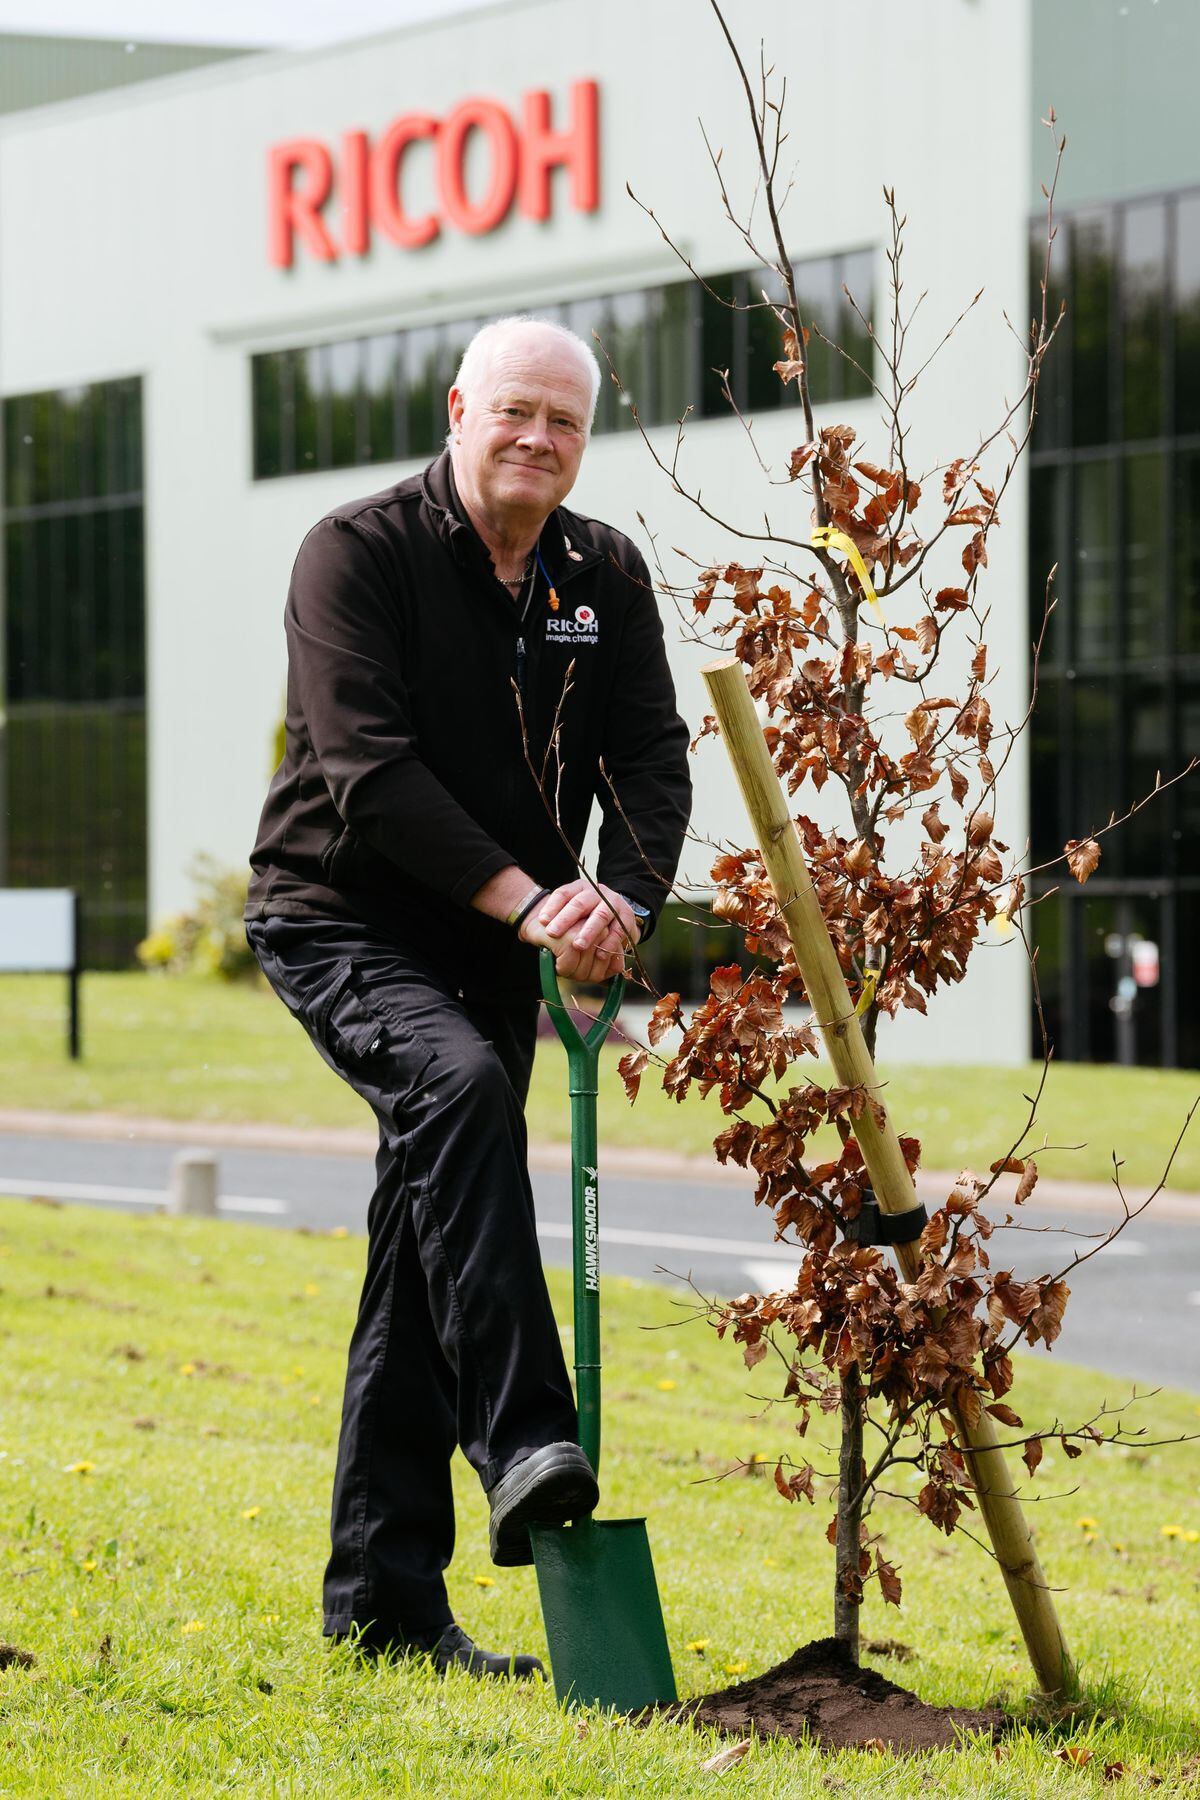 Assistant Operations Manager at Ricoh in Telford, Andy Wilbraham, planting a tree as part of the Queen's Green Canopy scheme.